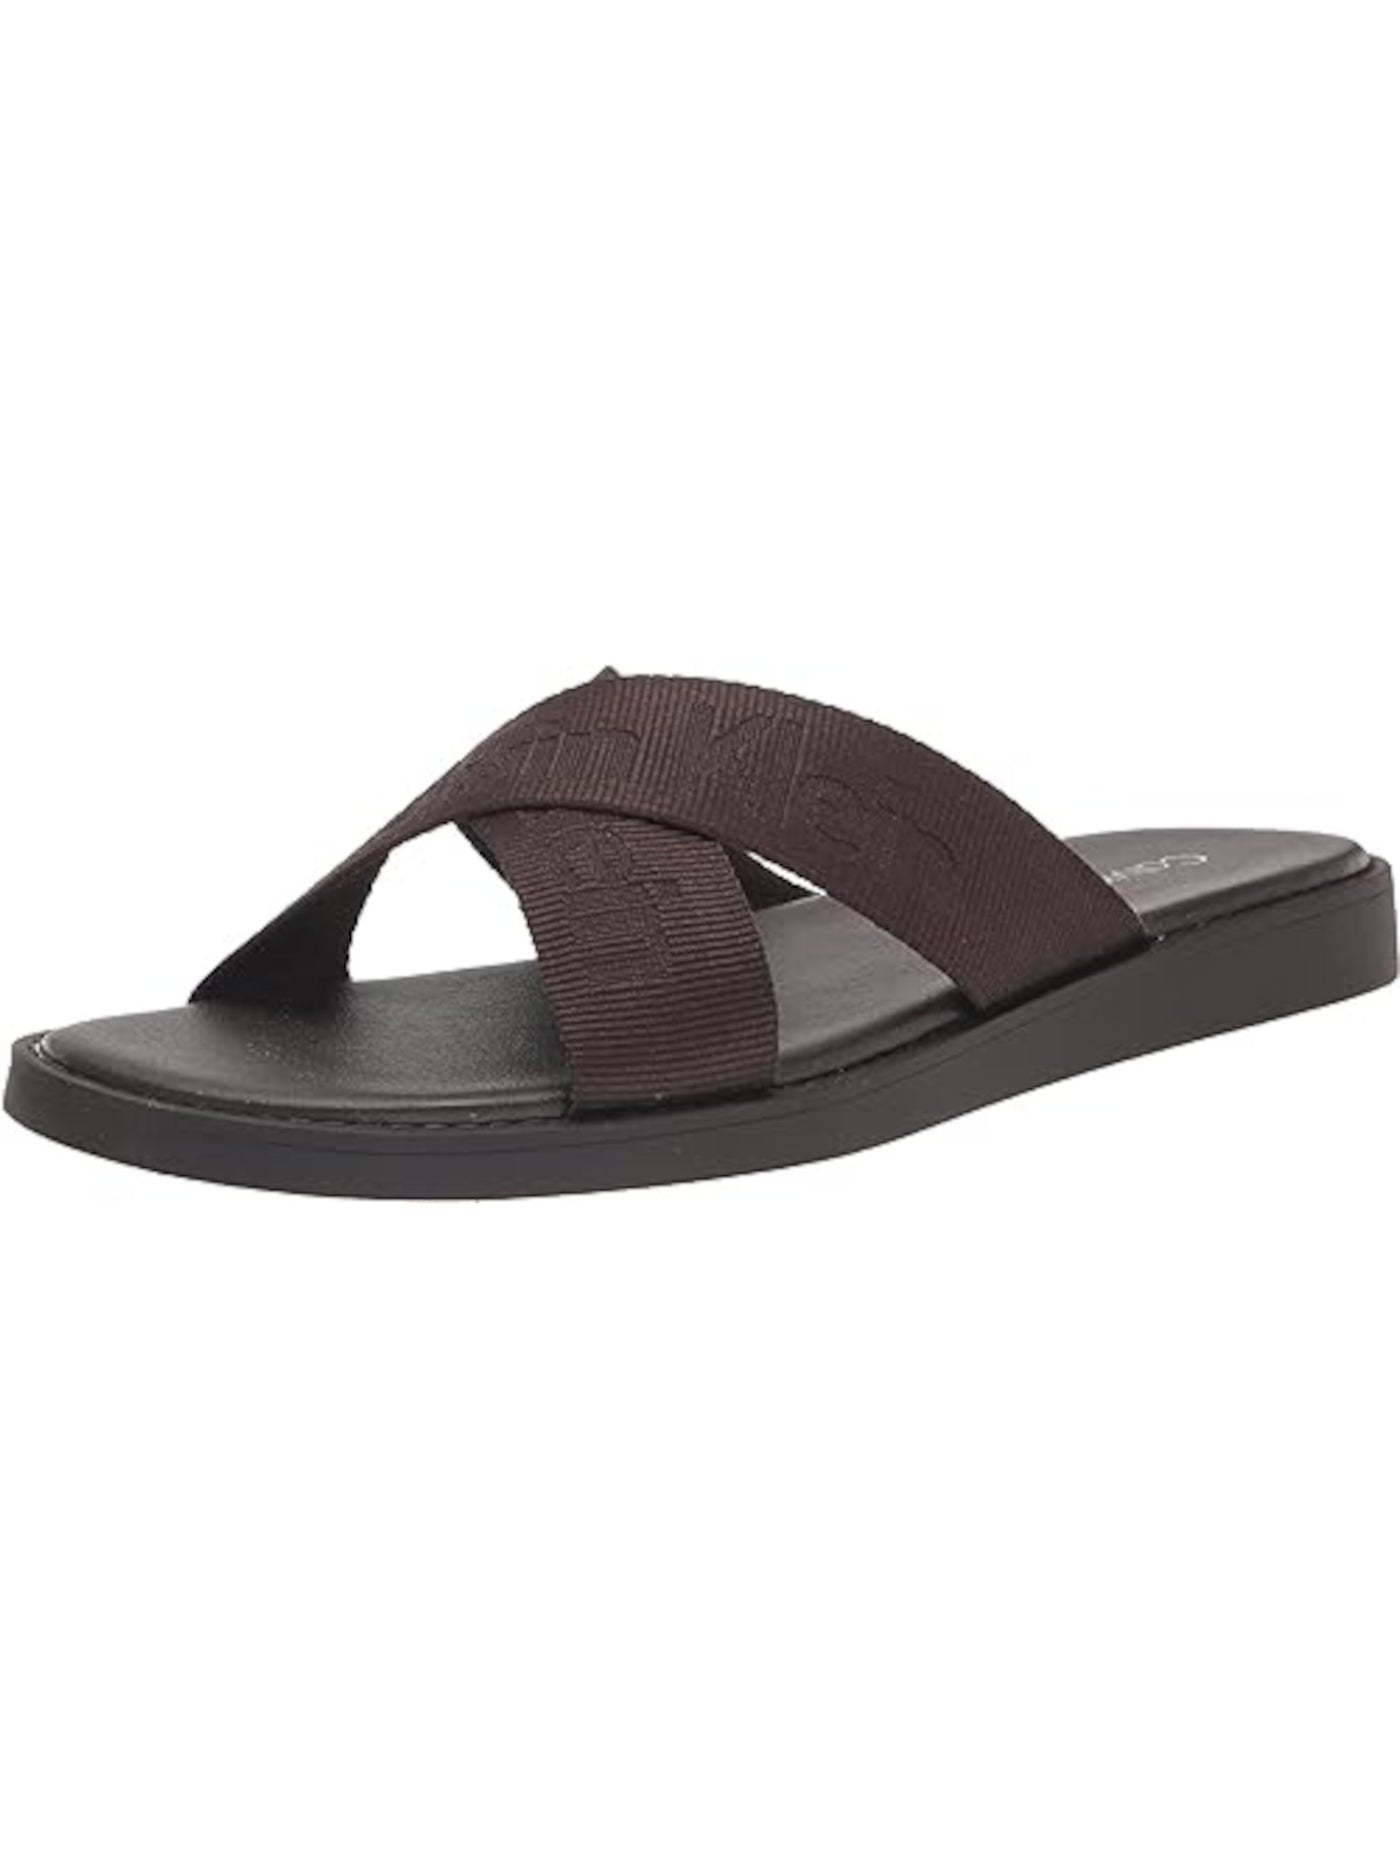 CALVIN KLEIN Mens Brown Mixed Media Cross Straps Padded Evano Round Toe Slide Sandals Shoes 7